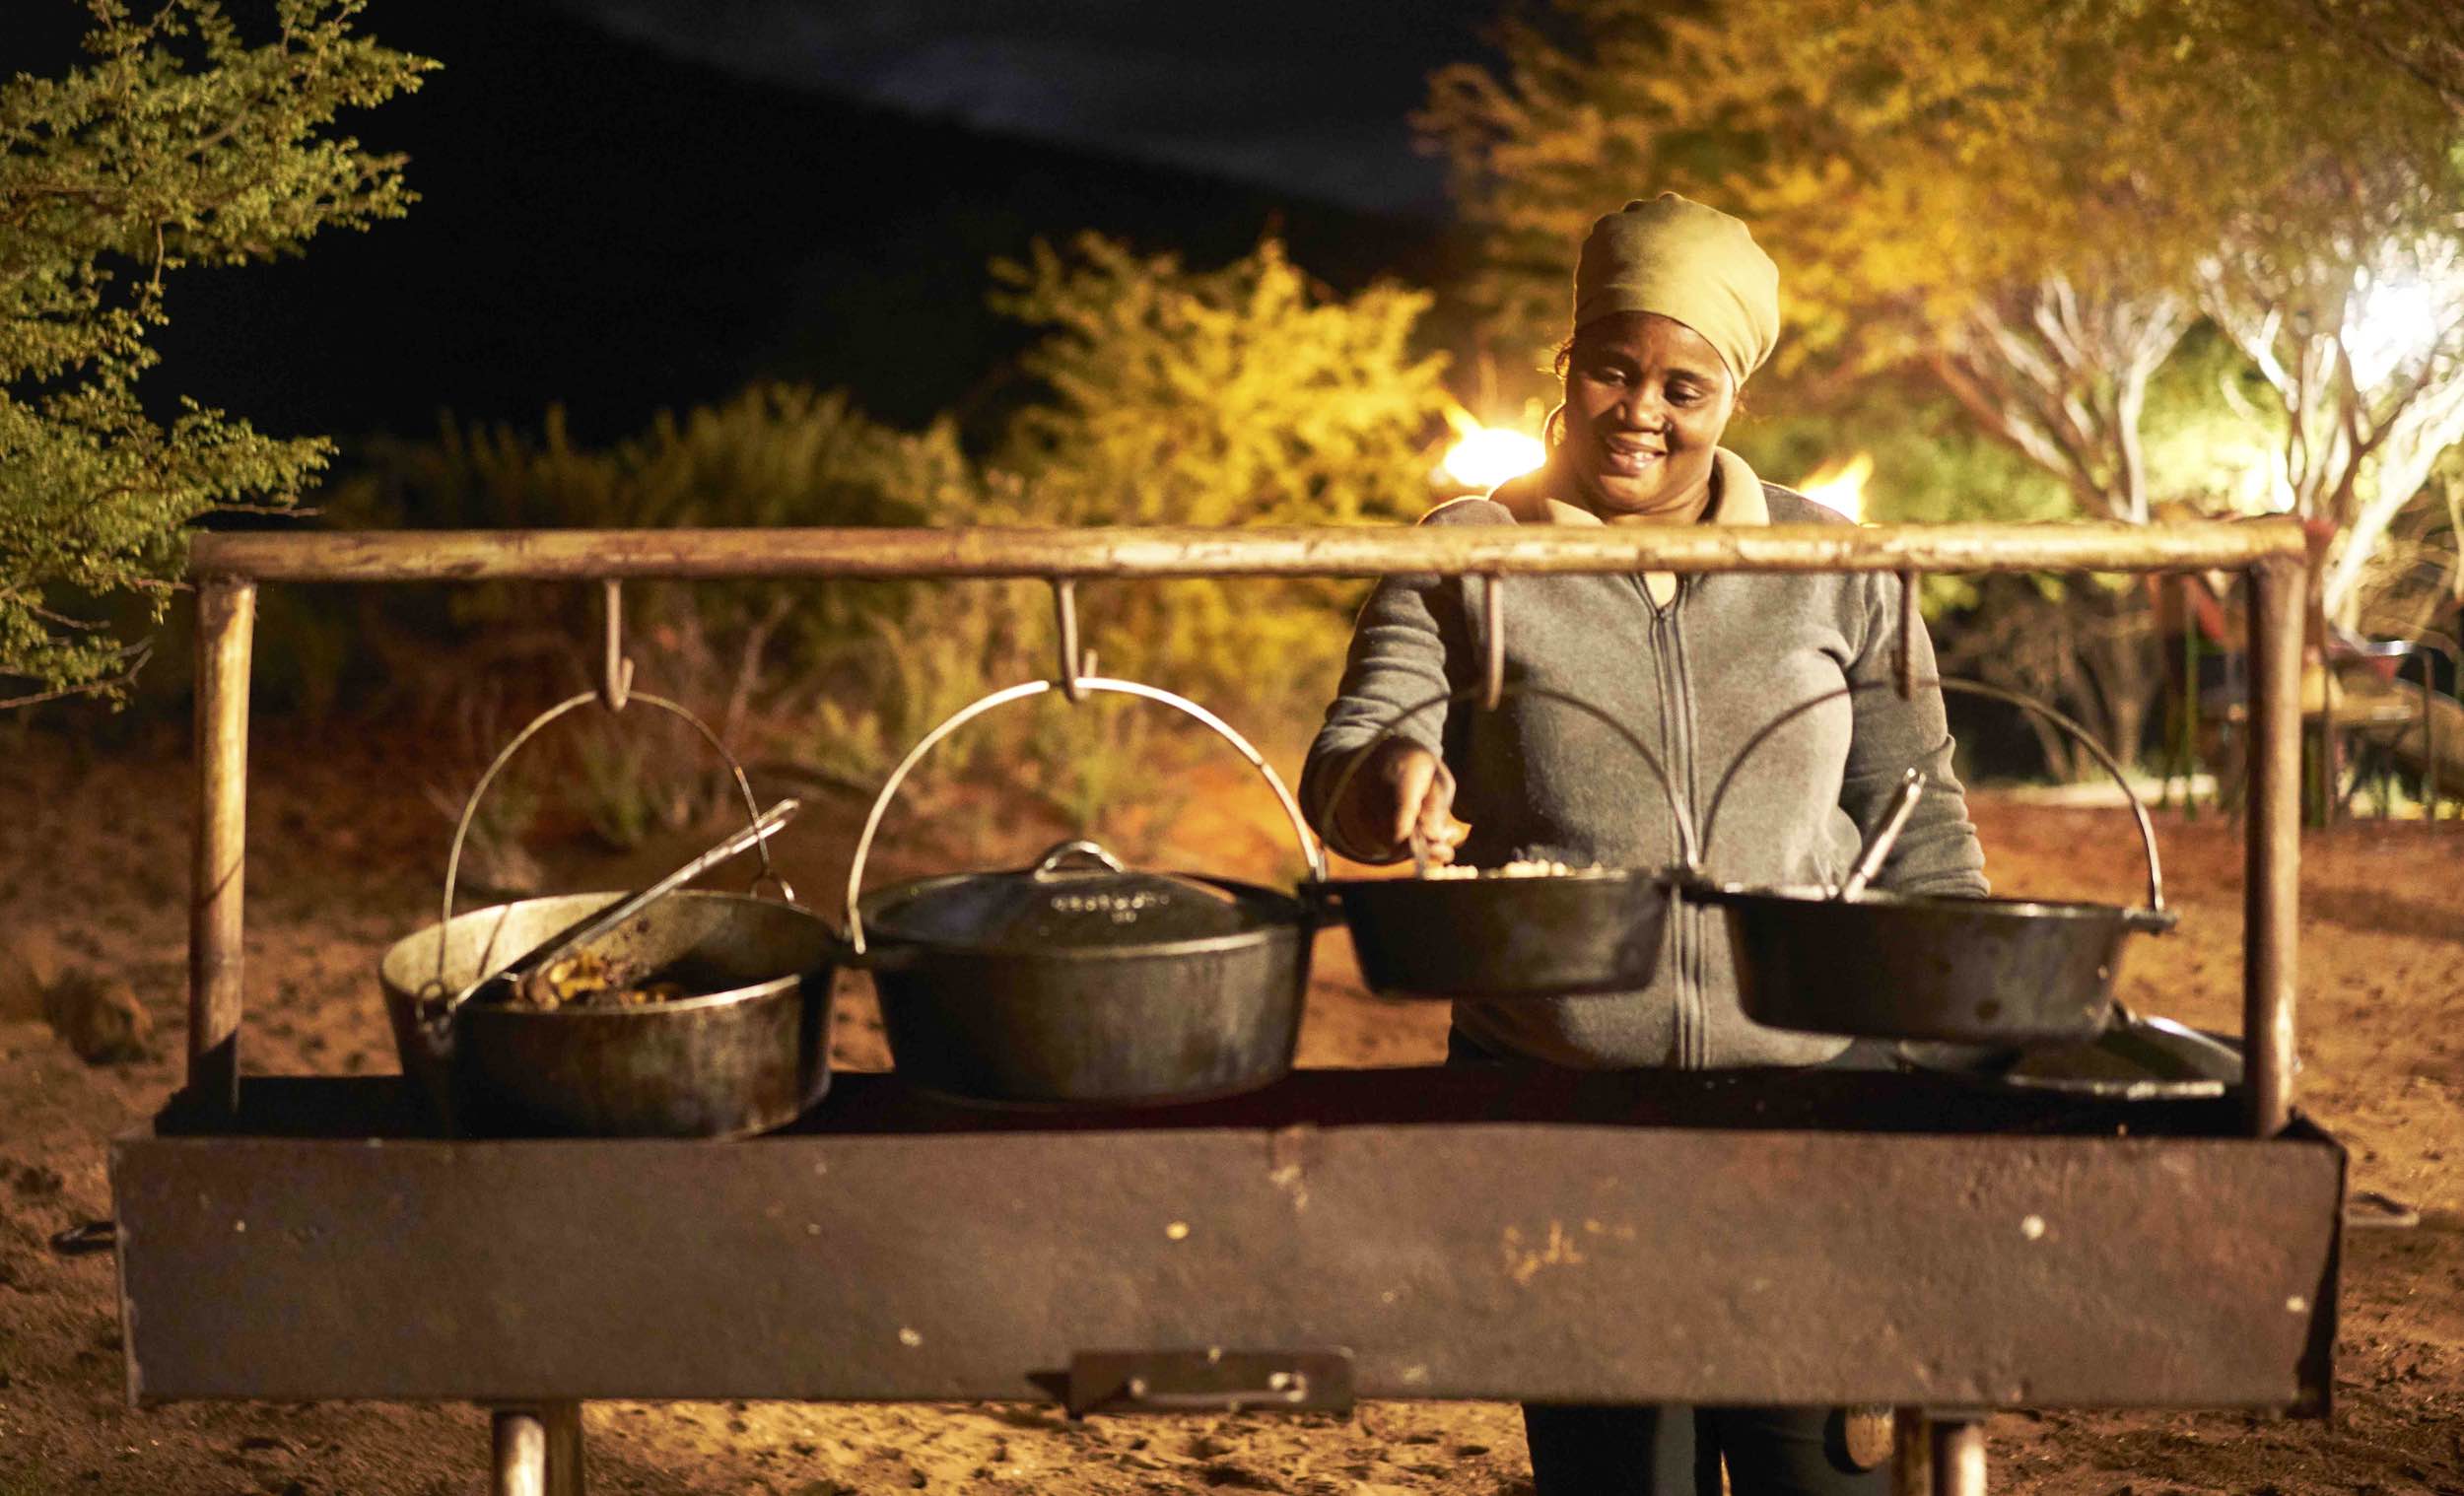 A woman prepares food in four iron pots hanging over an open fire.